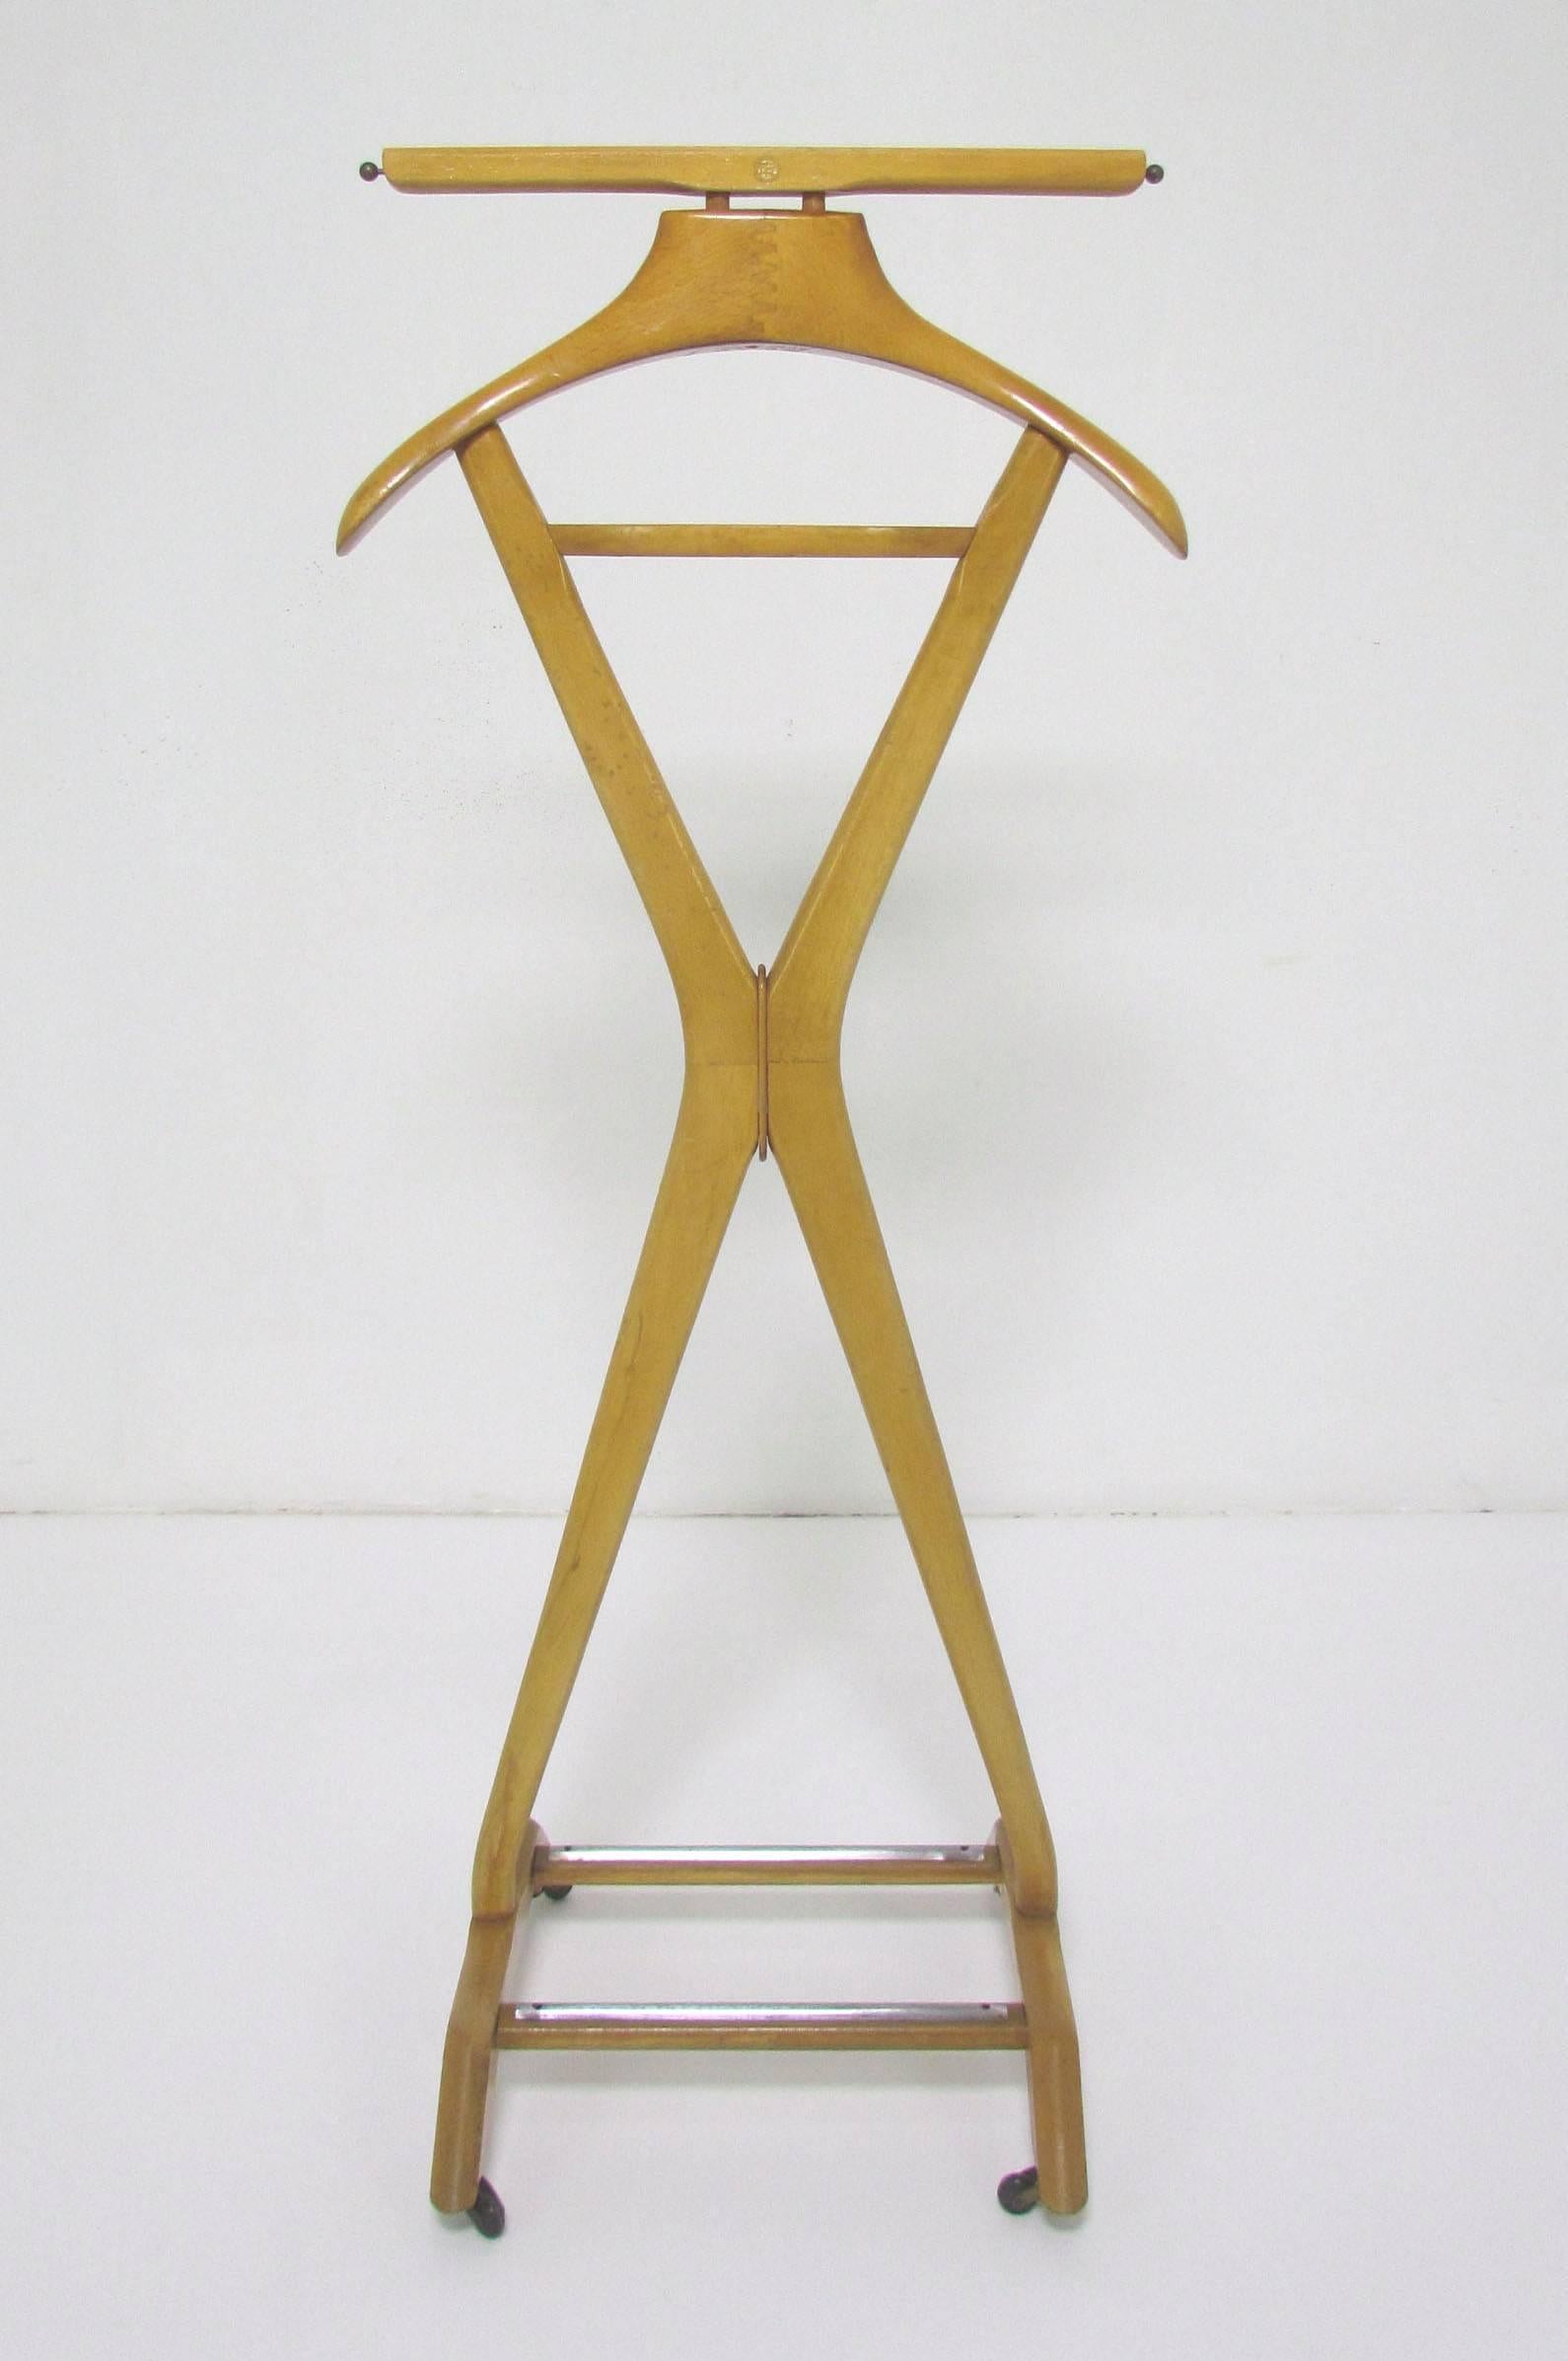 Classic gentleman's valet stand designed by Fratelli Reguitti, Italy, circa 1960s. In the style of Ico Parisi. Includes coat hanger, top rail to drape pants, telescoping rods for ties, and a tray for pocket accessories. Shoes can be placed on the